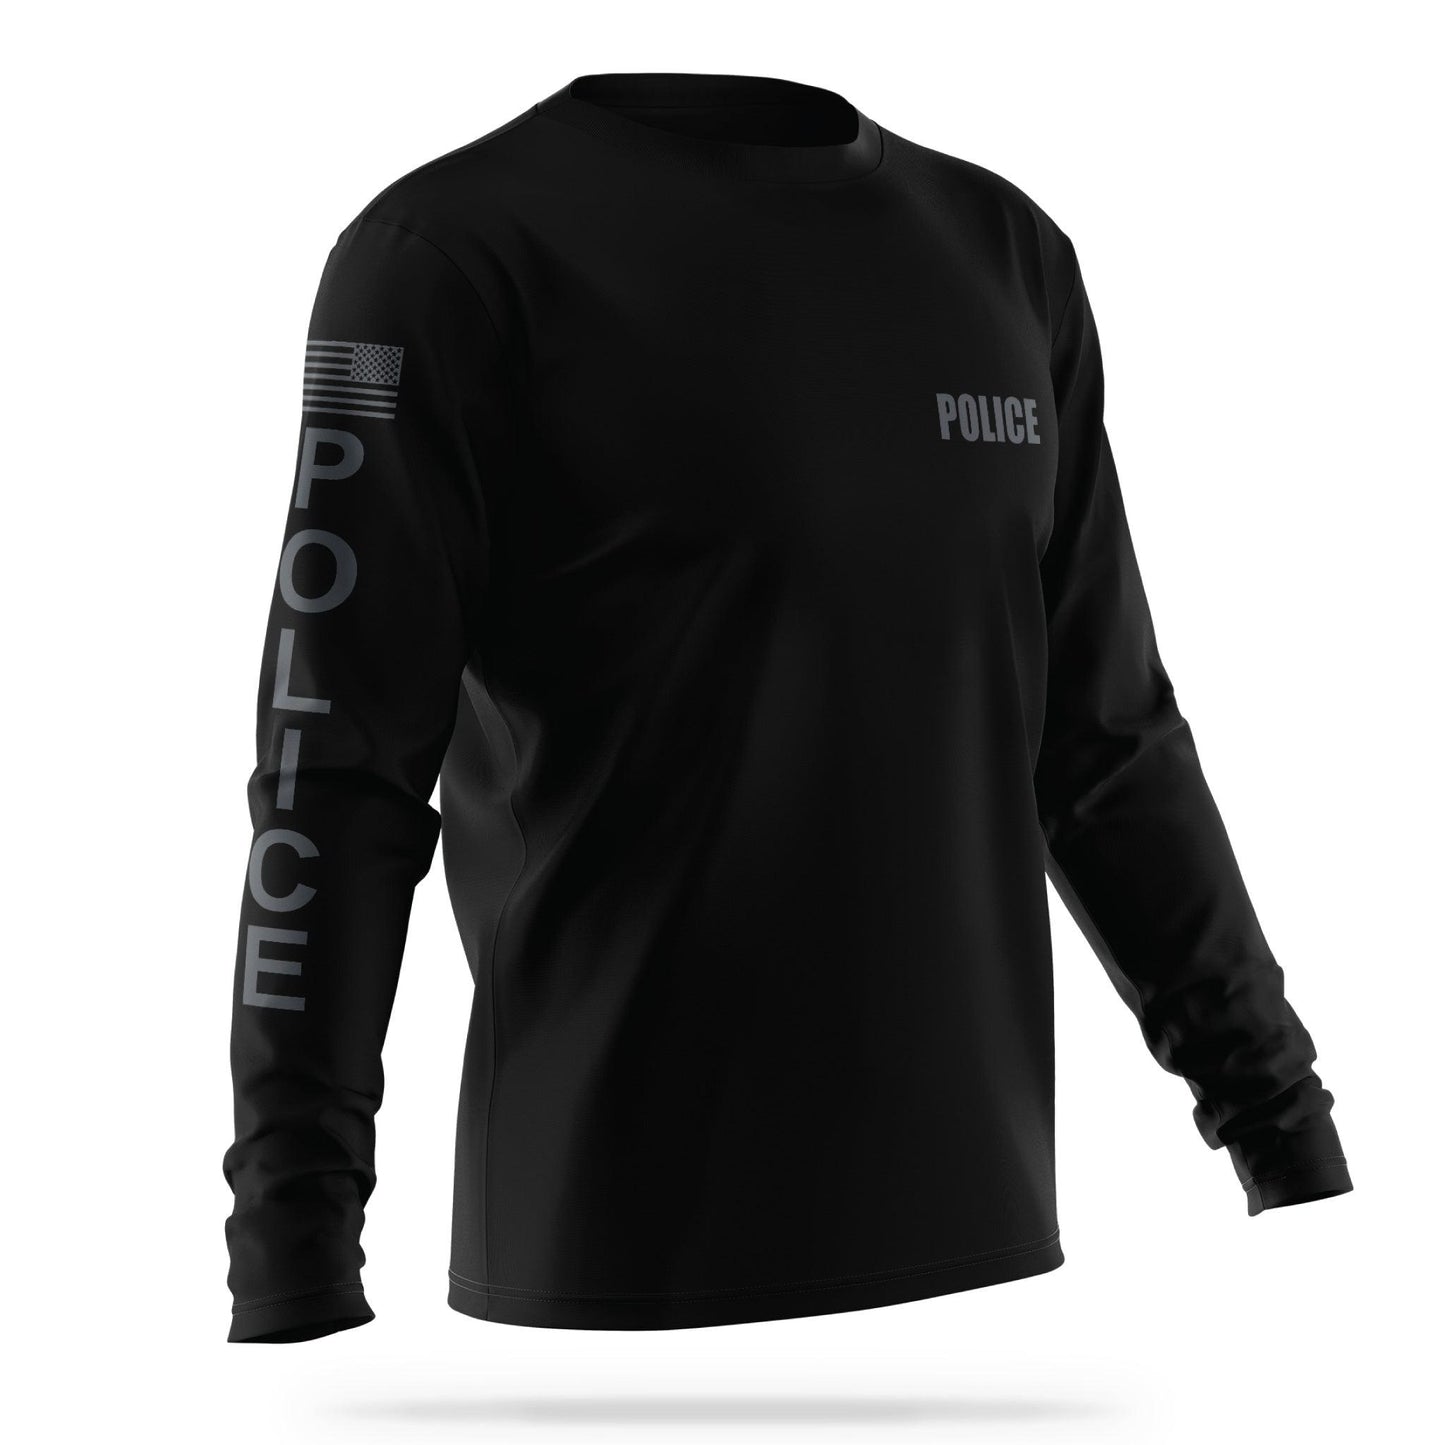 [POLICE] Men's Utility Long Sleeve [BLK/GRY]-13 Fifty Apparel